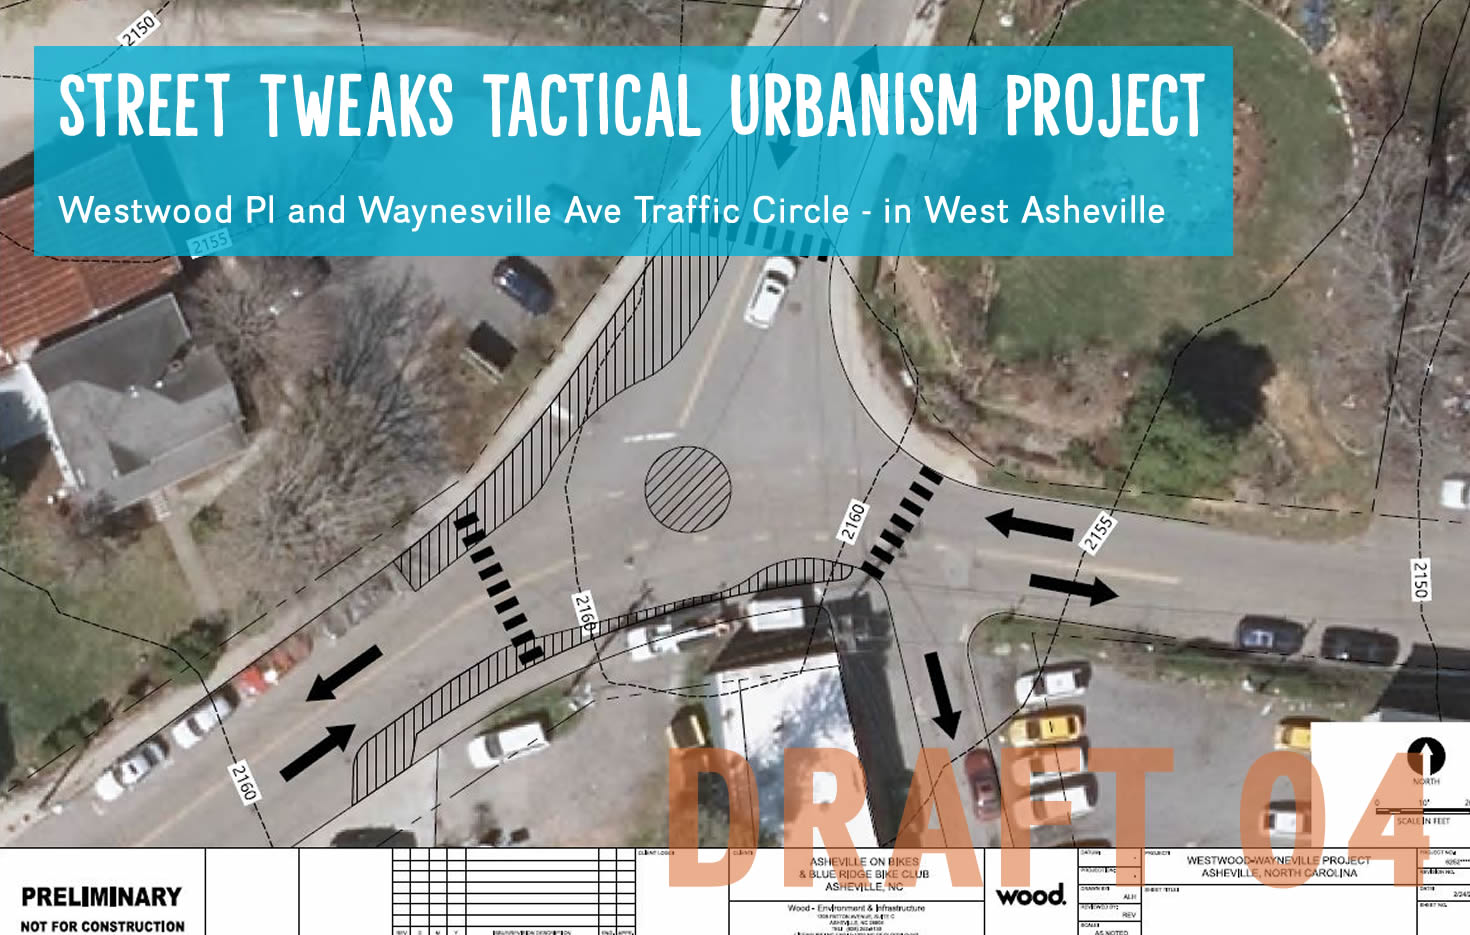 Westwood Place and Waynesville Ave Tactical Urbanism Project in